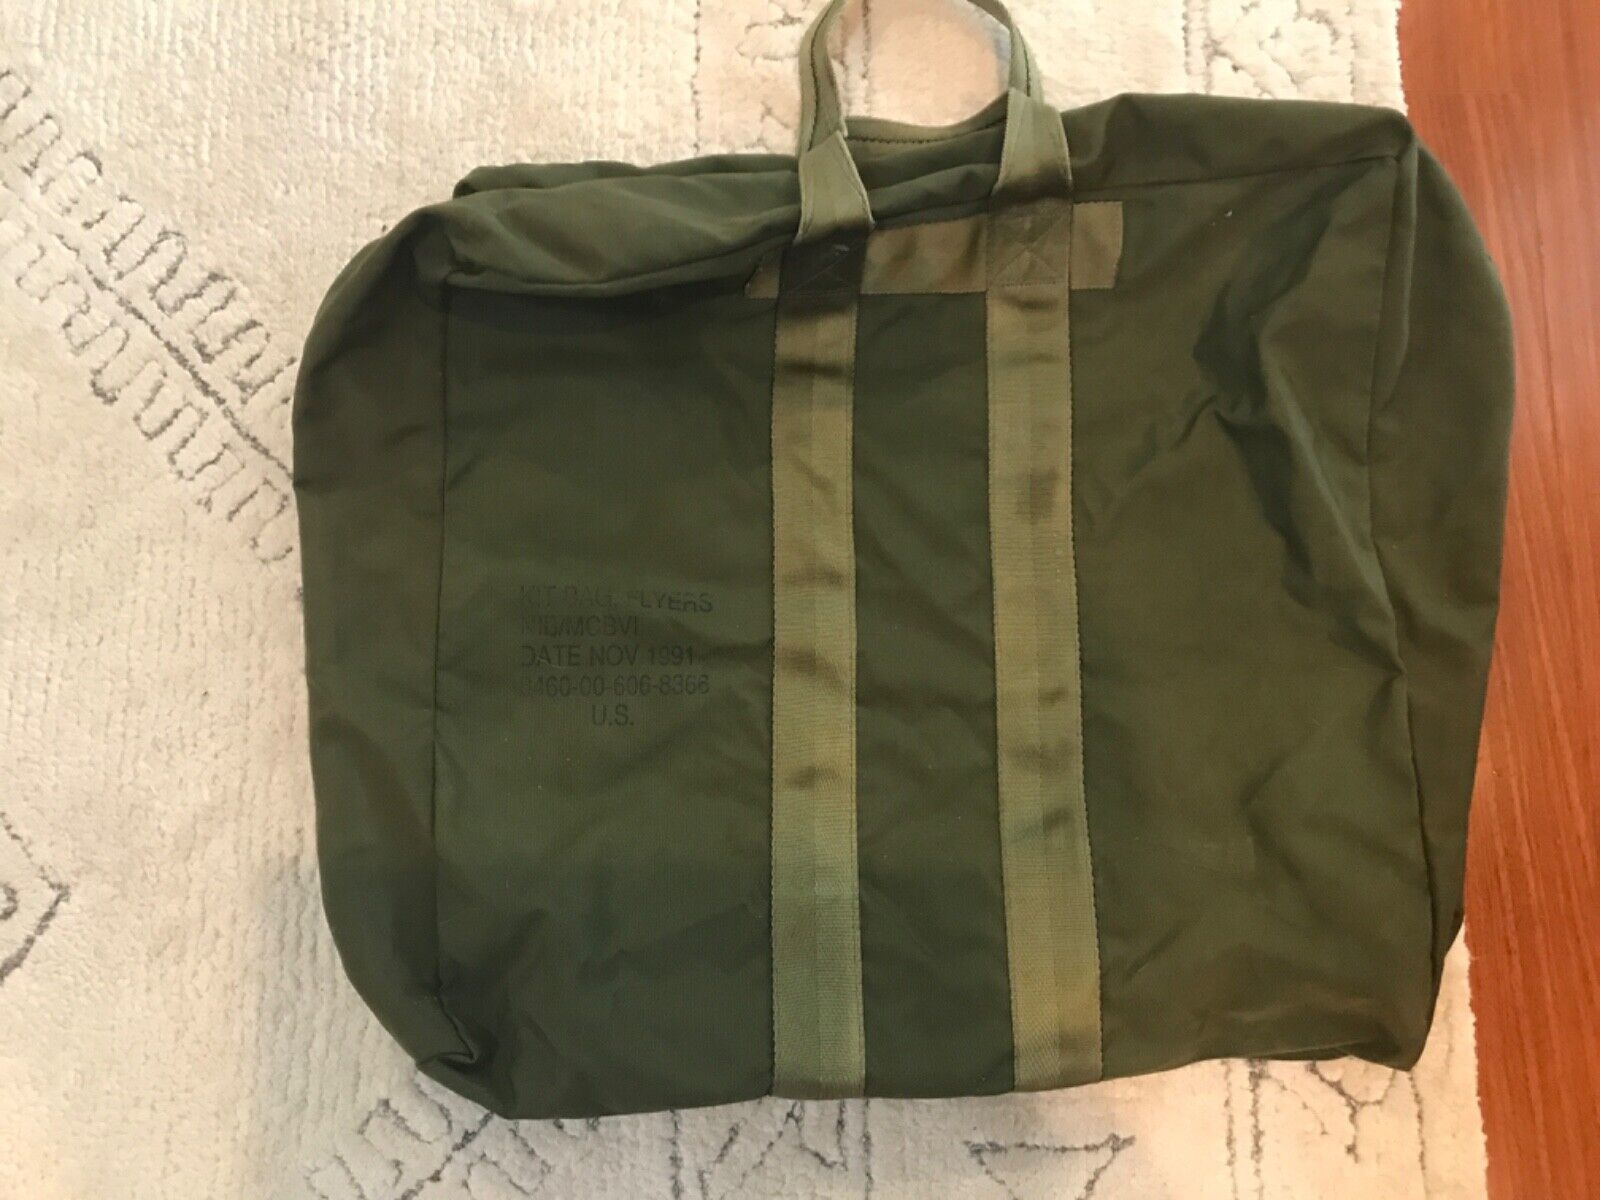 1991 Military USAF Kit Bag/Flyers EXCELLENT cond, Green Heavy Canvas